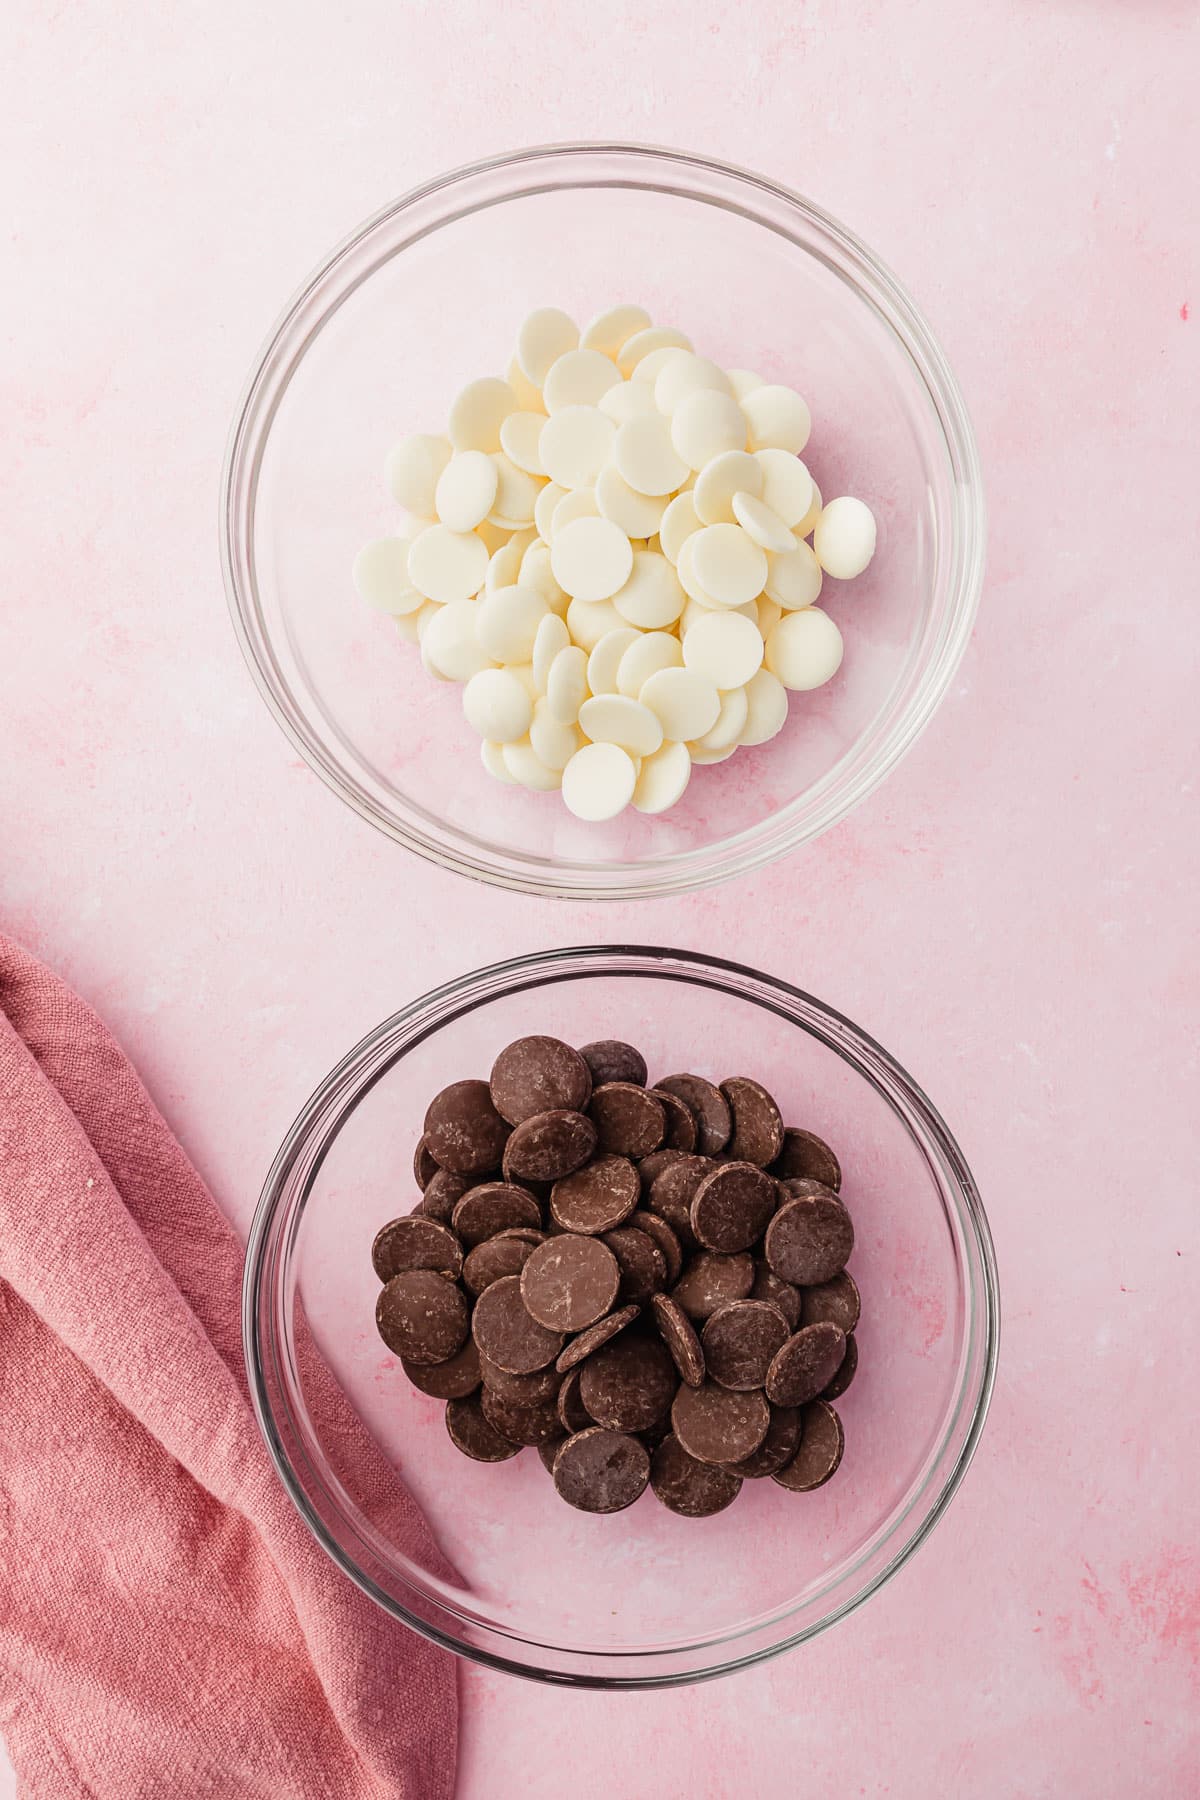 Two glass mixing bowls filled with white chocolate candy melts and dark chocolate candy melts before each bowl has been melted.